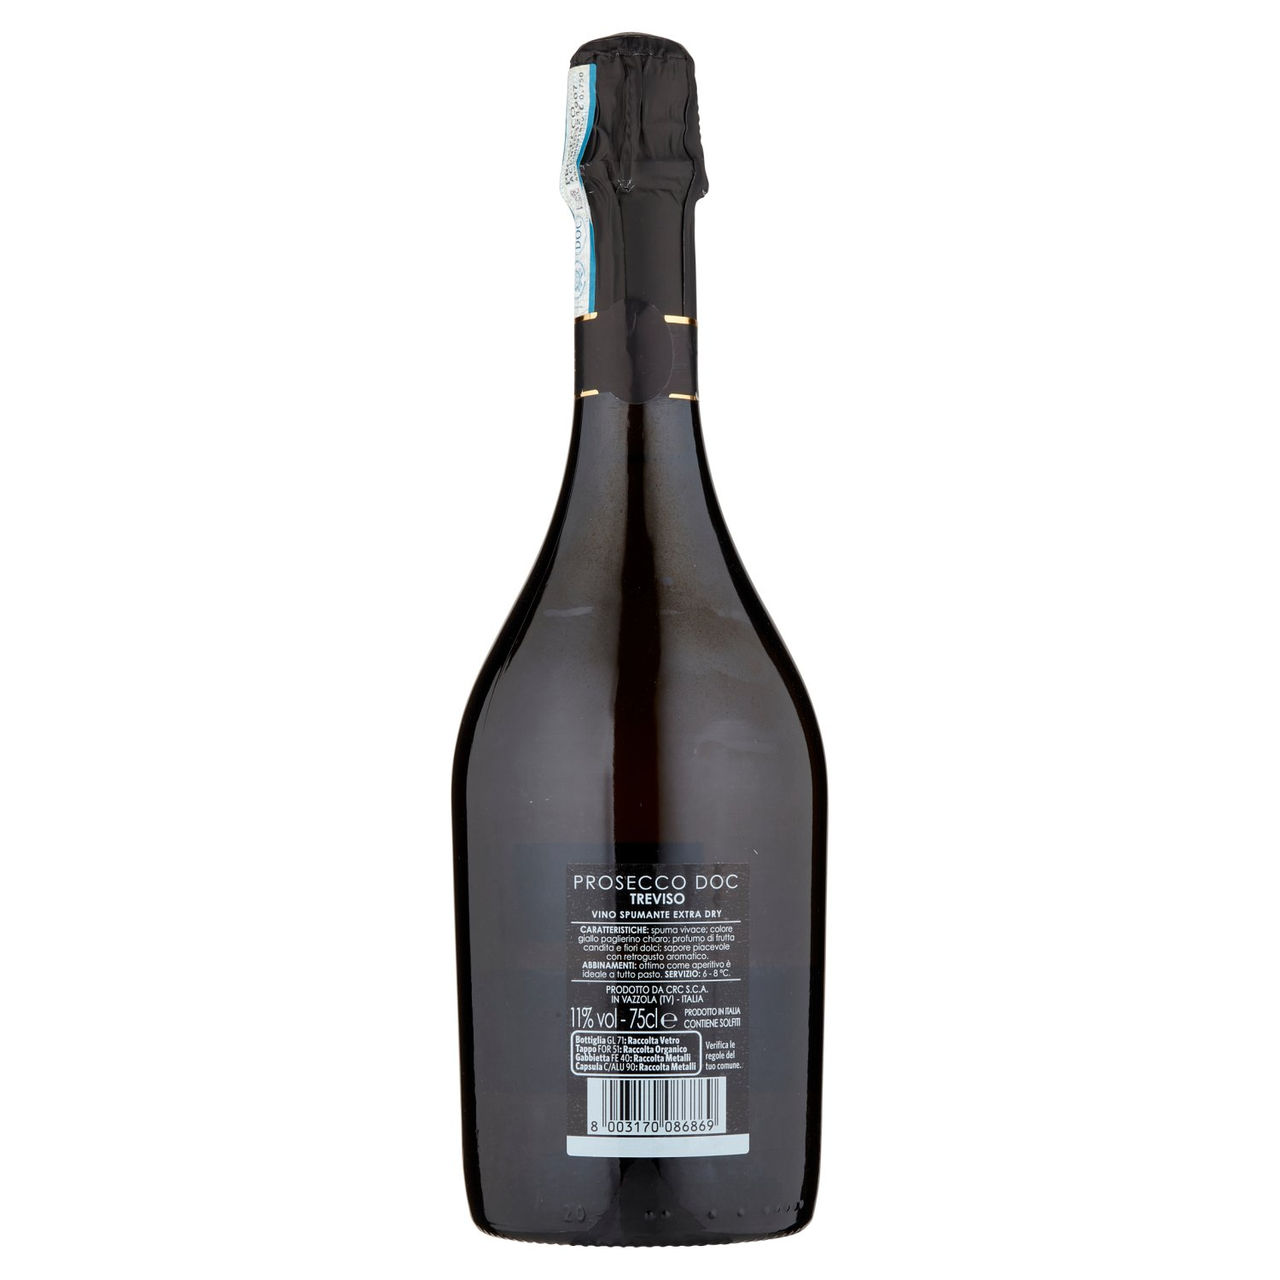 Dame Tervise Prosecco DOC Treviso Extra Dry 75 cl